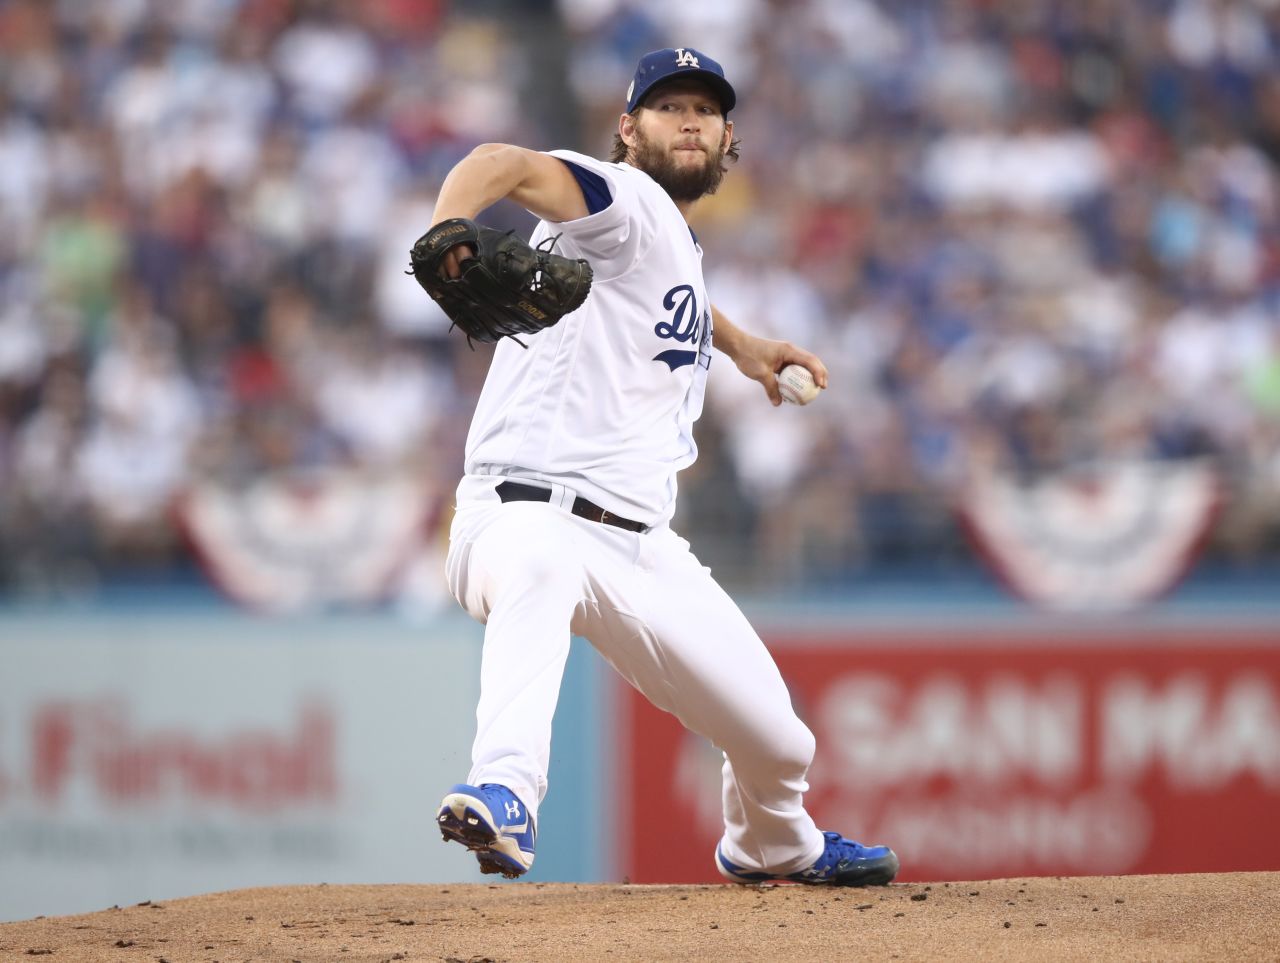 Dodgers pitcher Clayton Kershaw throws a pitch against Boston in the first inning of Game 5.